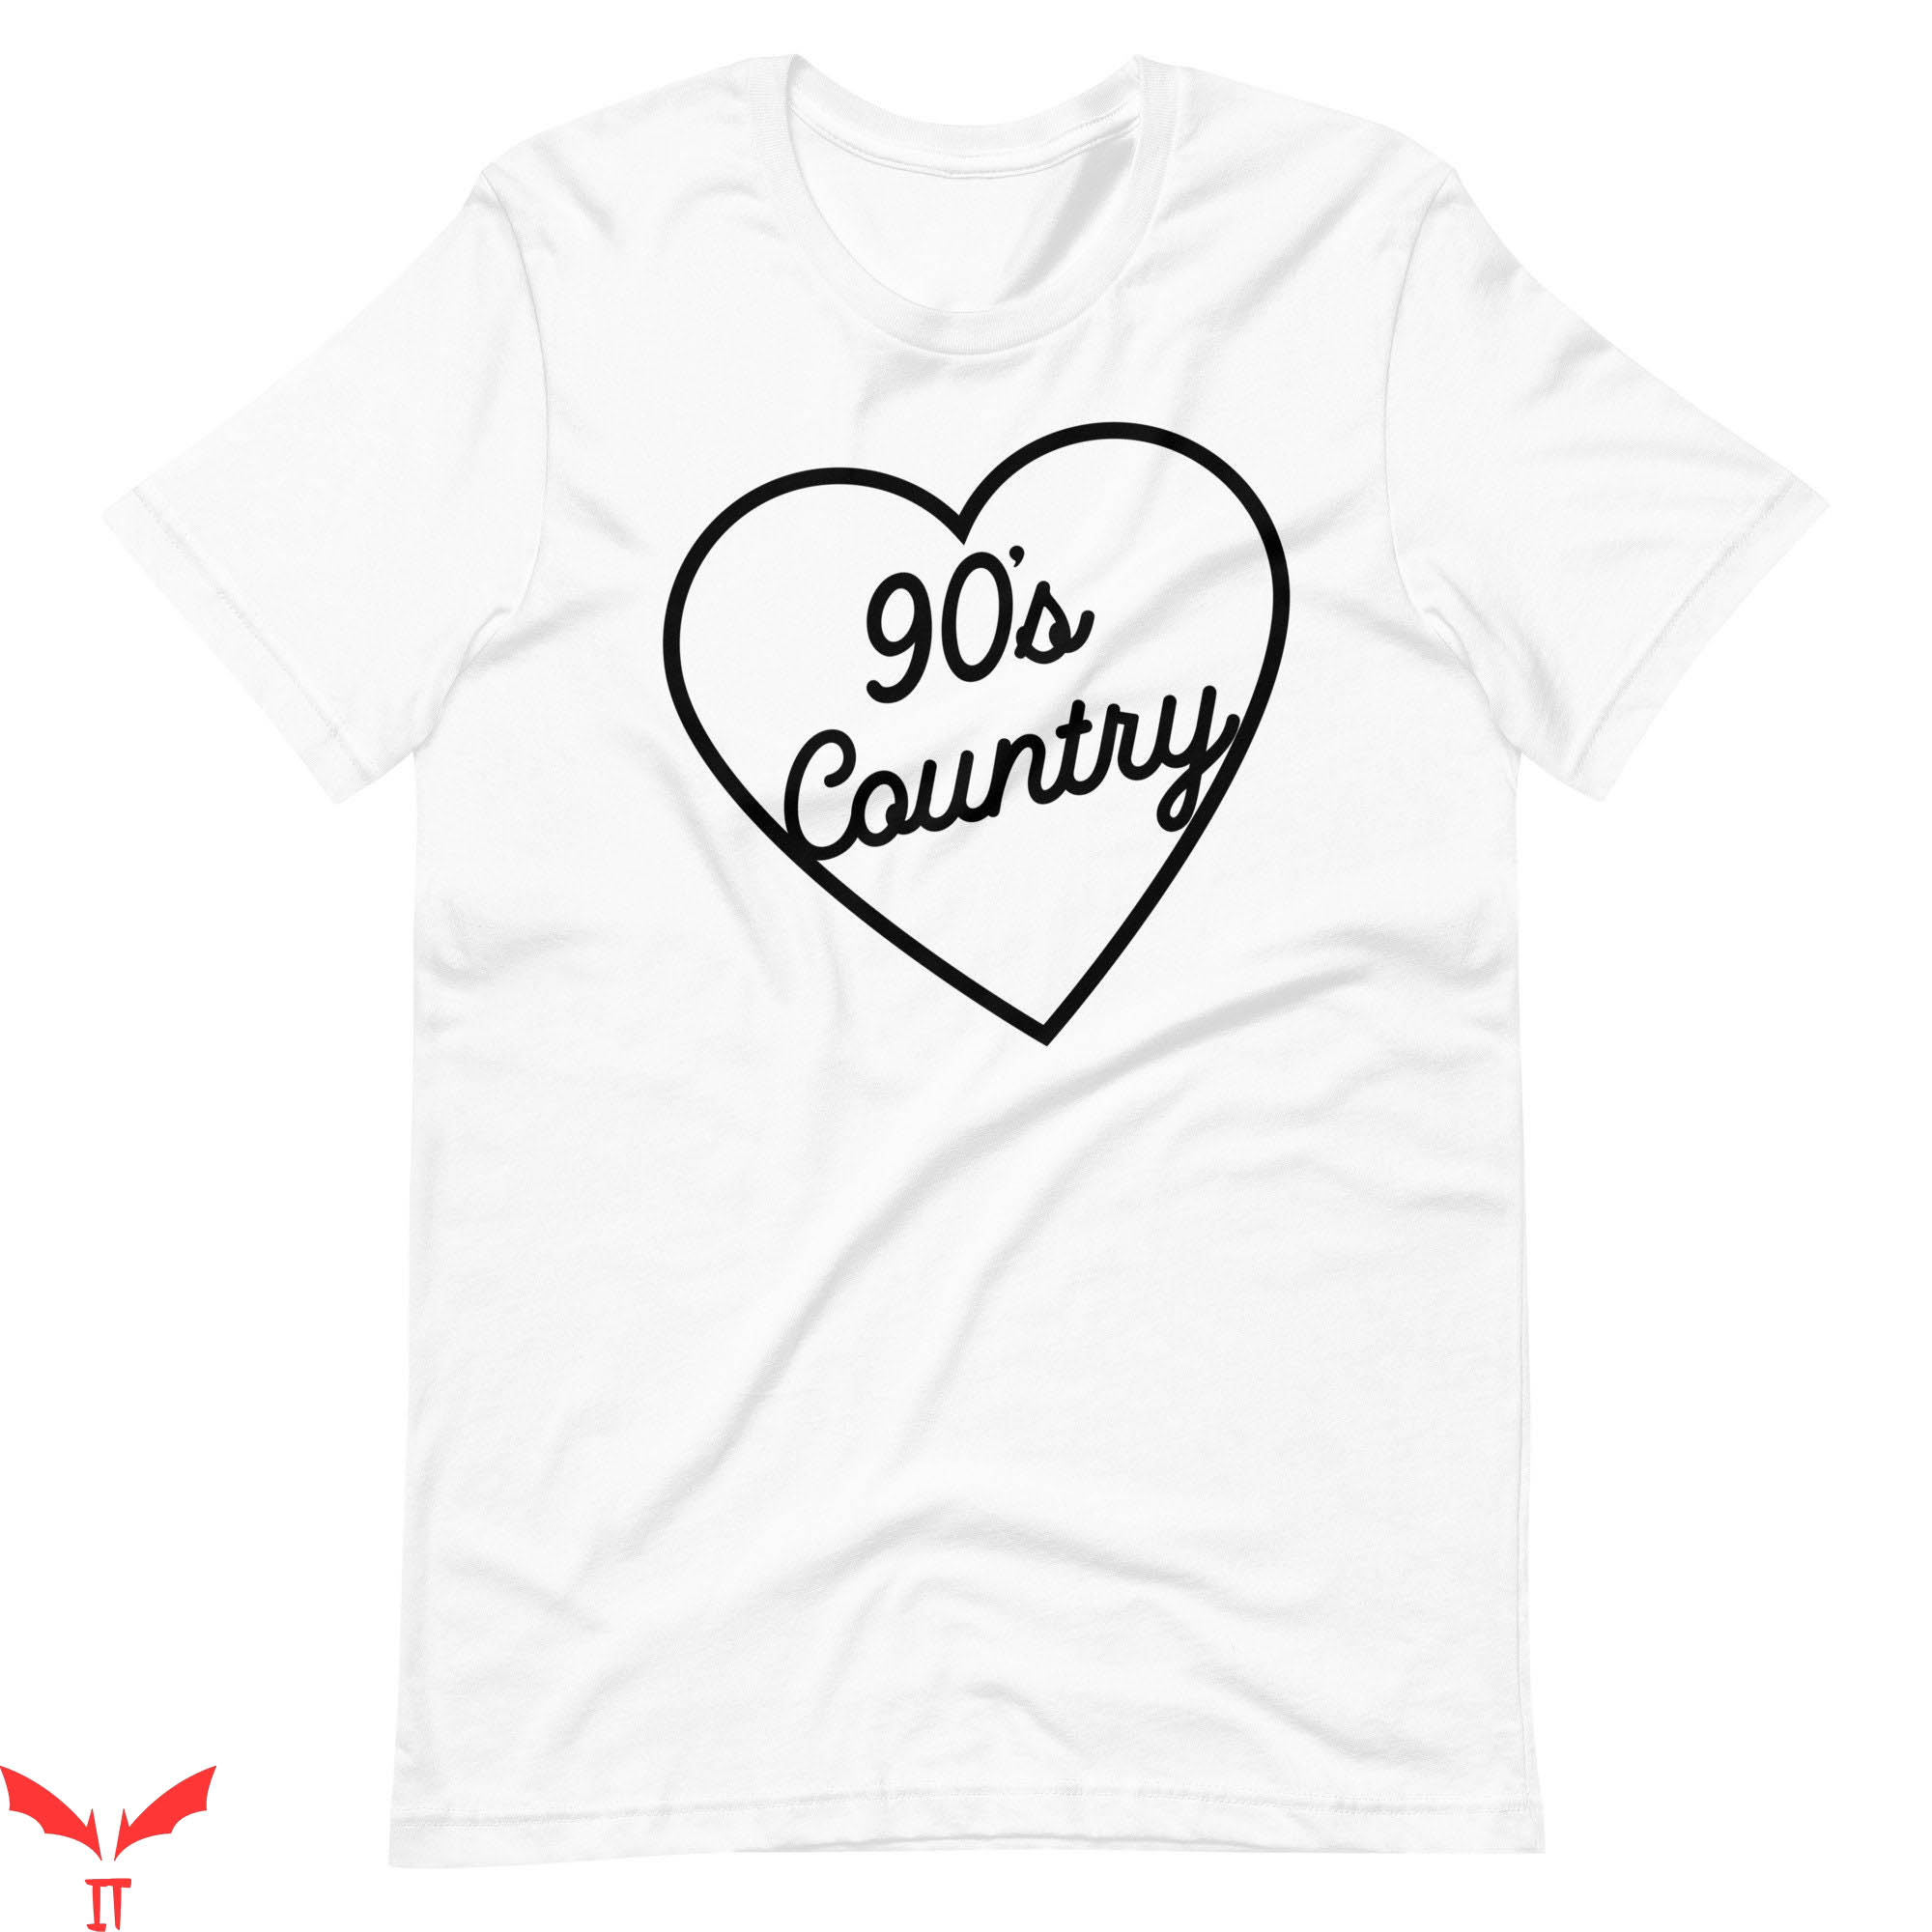 90s Country T-Shirt Love 90's Country Vintage Retro Tee